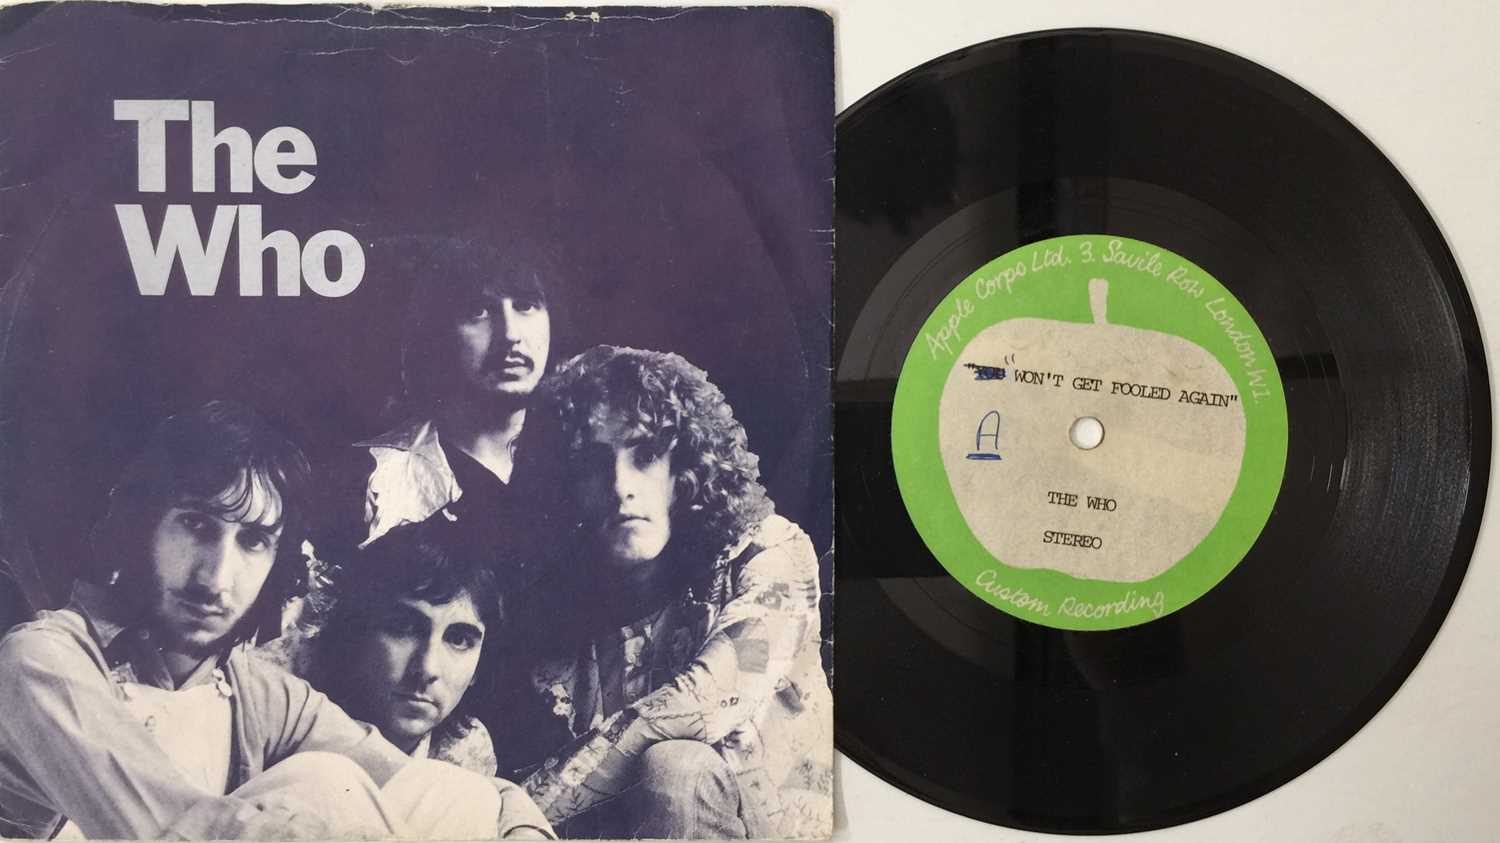 Lot 666 - THE WHO - YOU (SIC.) WON'T GET FOOLED AGAIN - ORIGINAL APPLE 7" ACETATE RECORDING